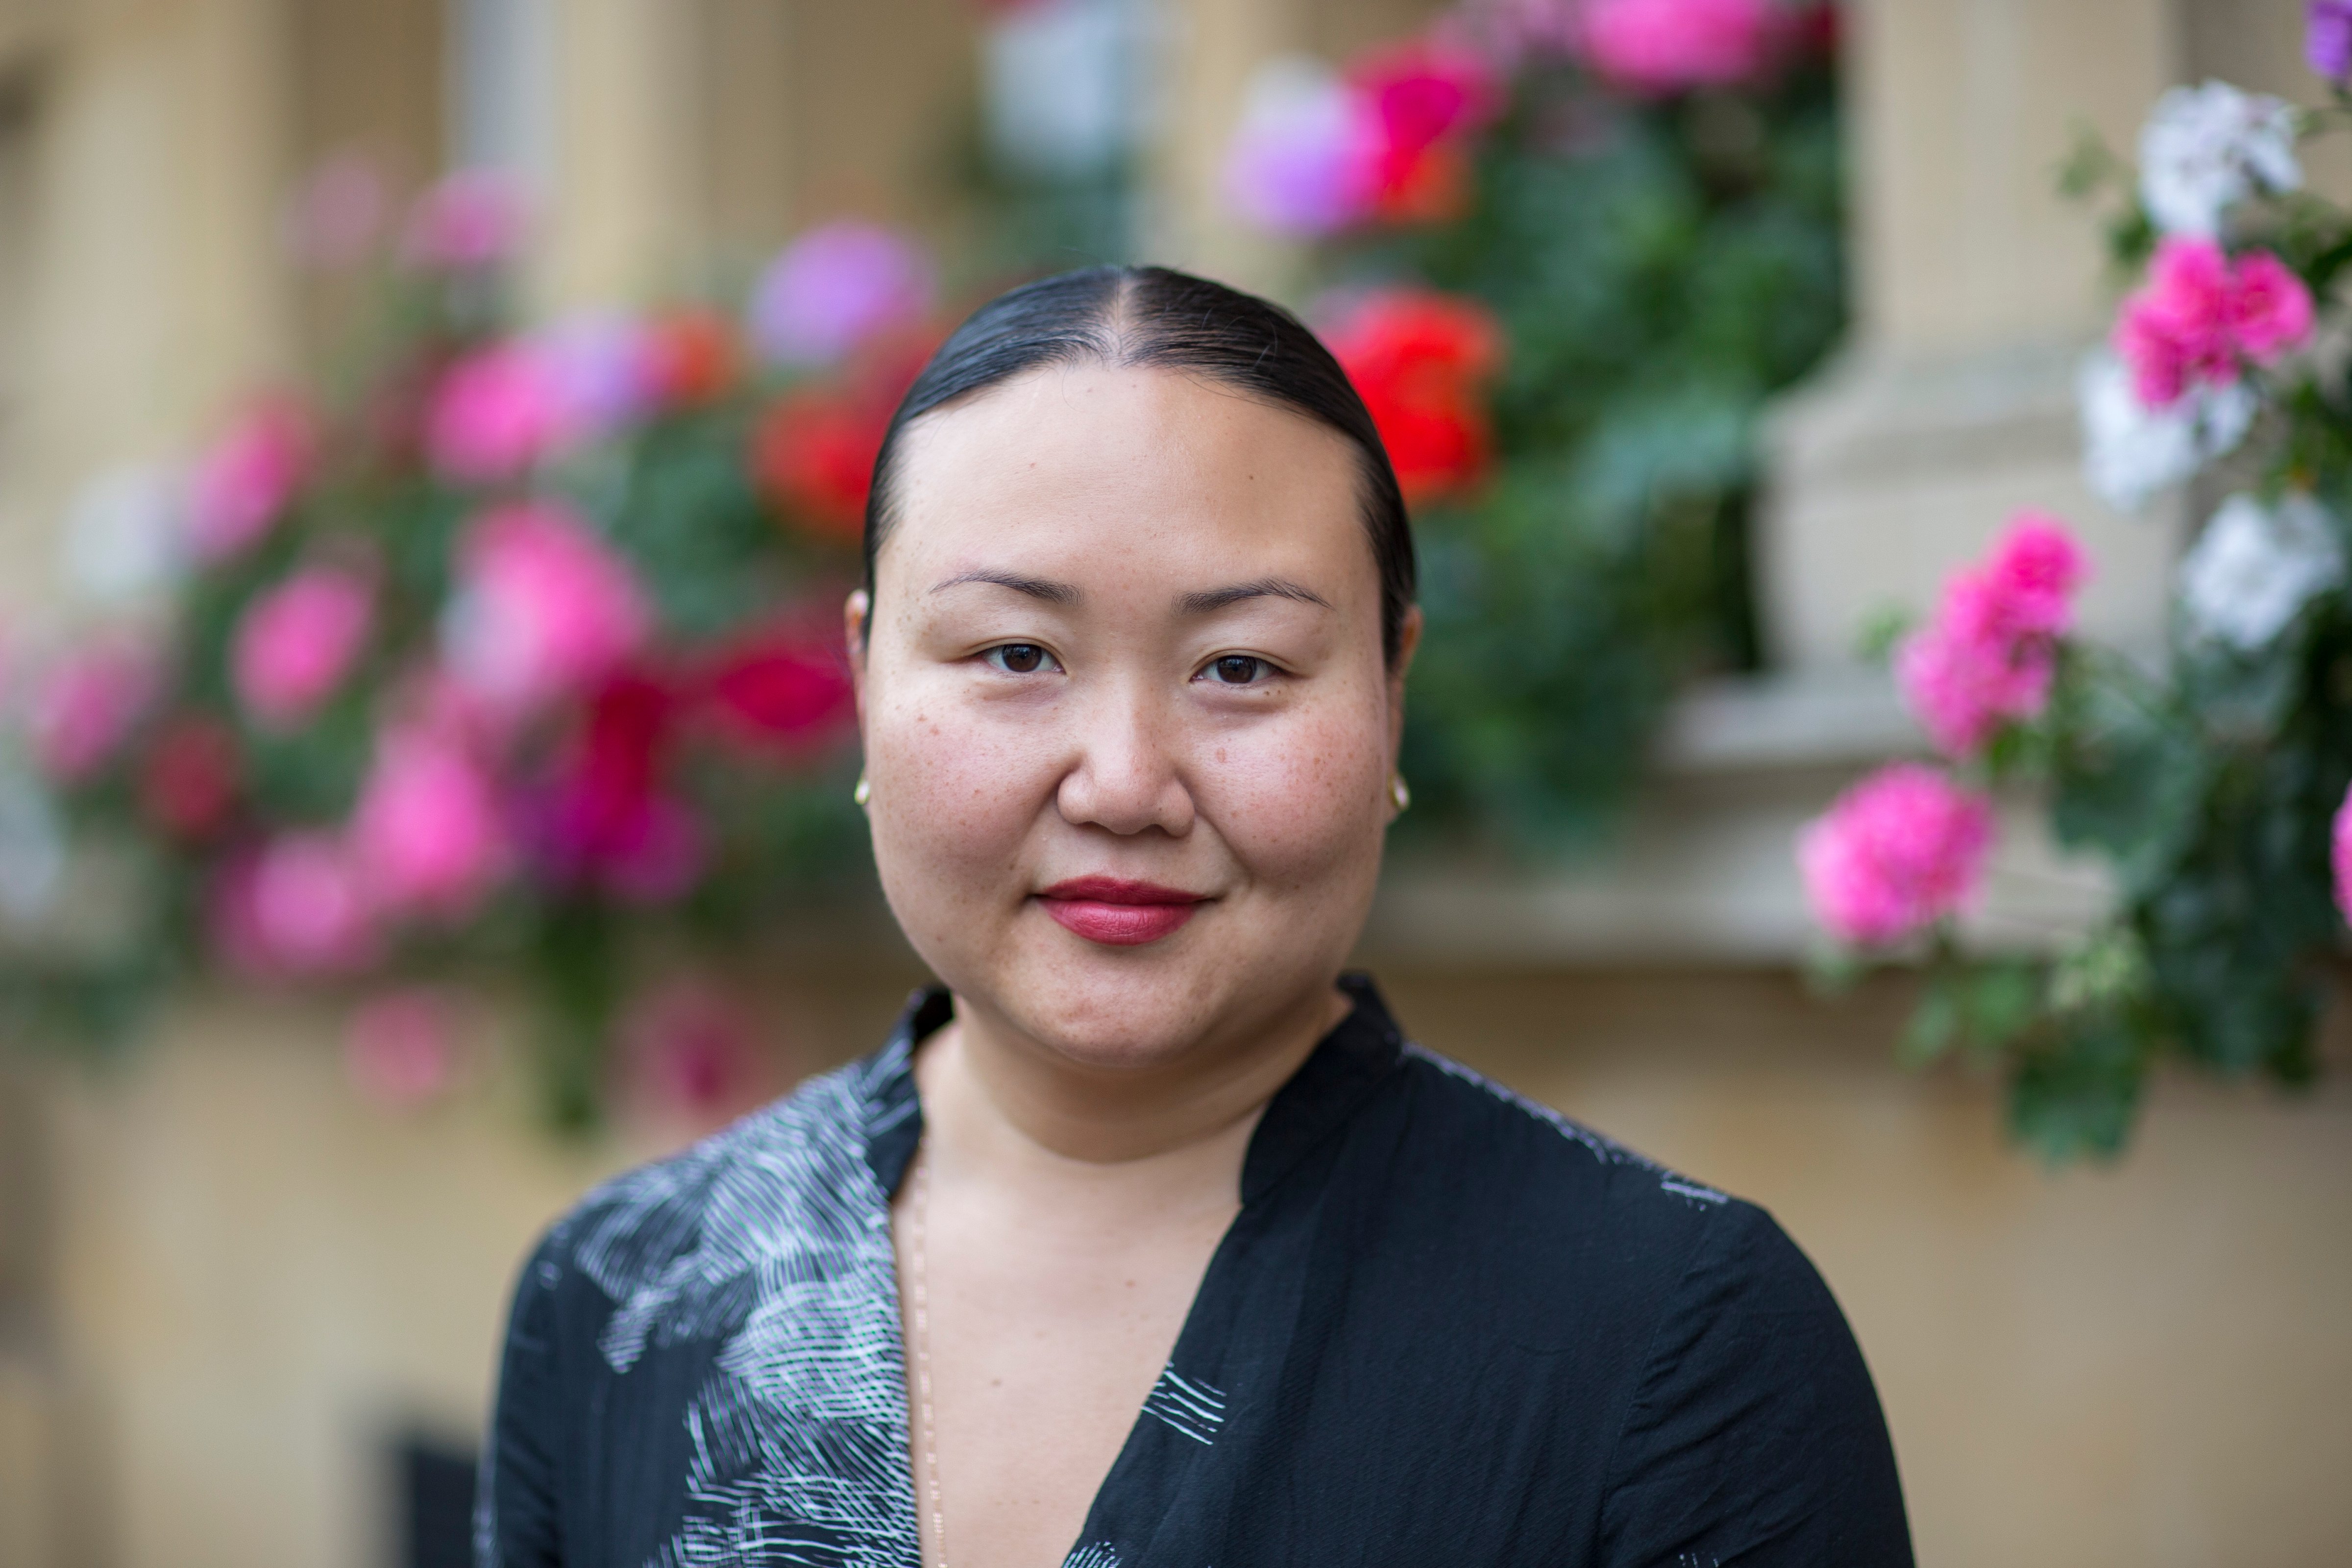 Hanya Yanagihara's third novel 'To Paradise' asks big questions about America. (Getty Images - 2015 David Levenson)